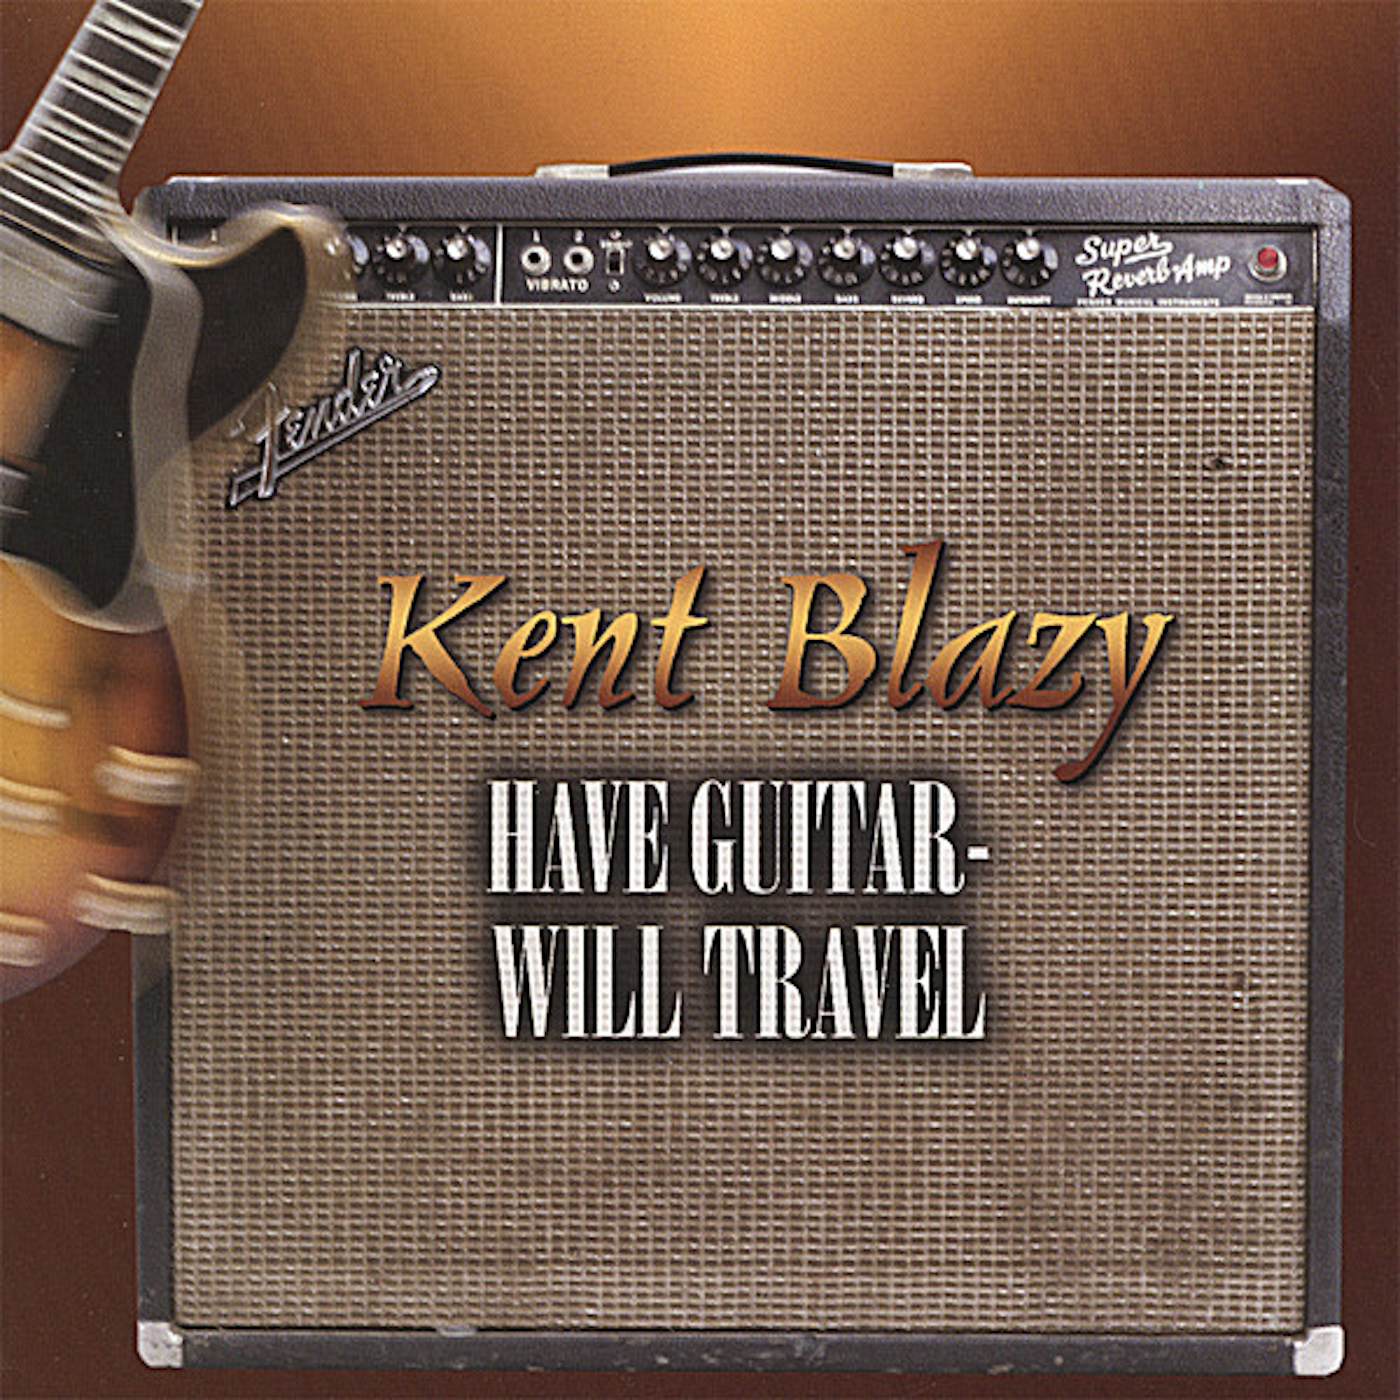 Kent Blazy HAVE GUITAR WILL TRAVEL CD